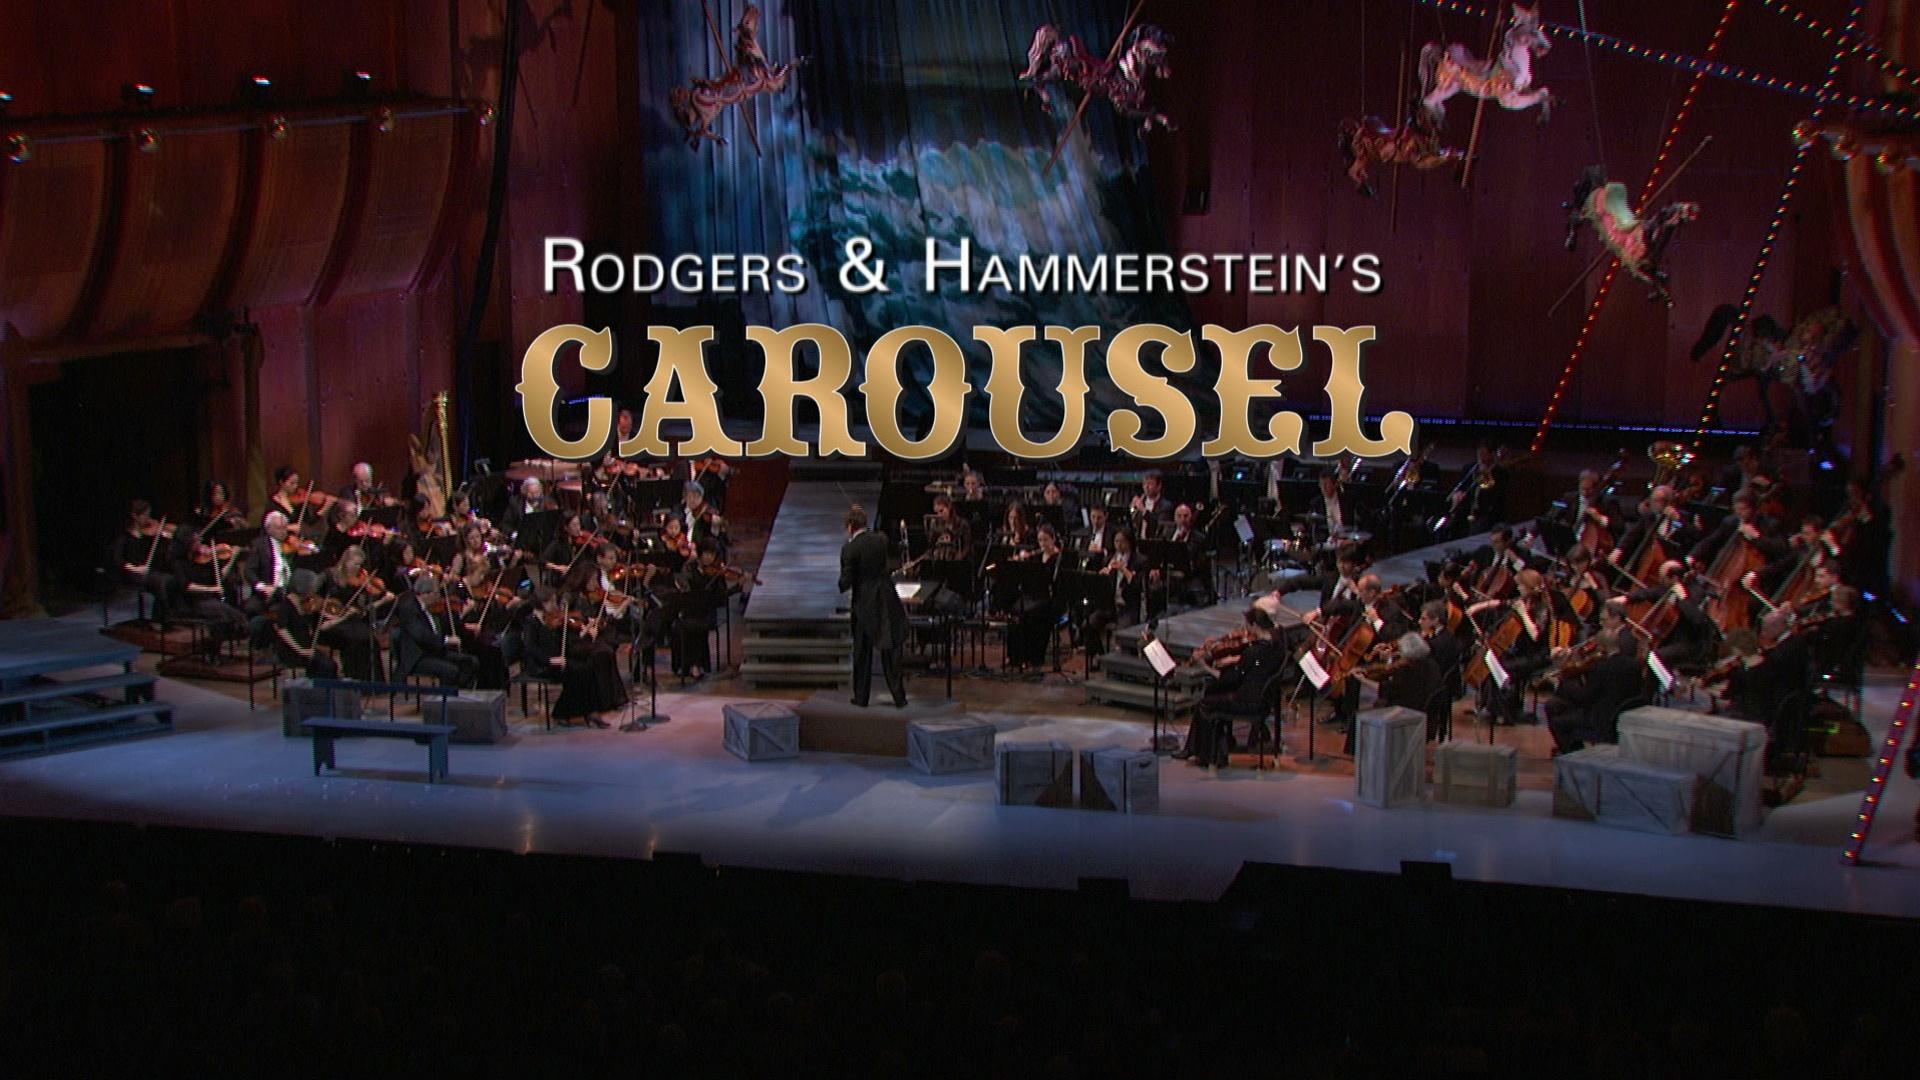 Live　Episode　PBS　Hammerstein's　From　Rodgers　Season　Lincoln　38　Center　Carousel